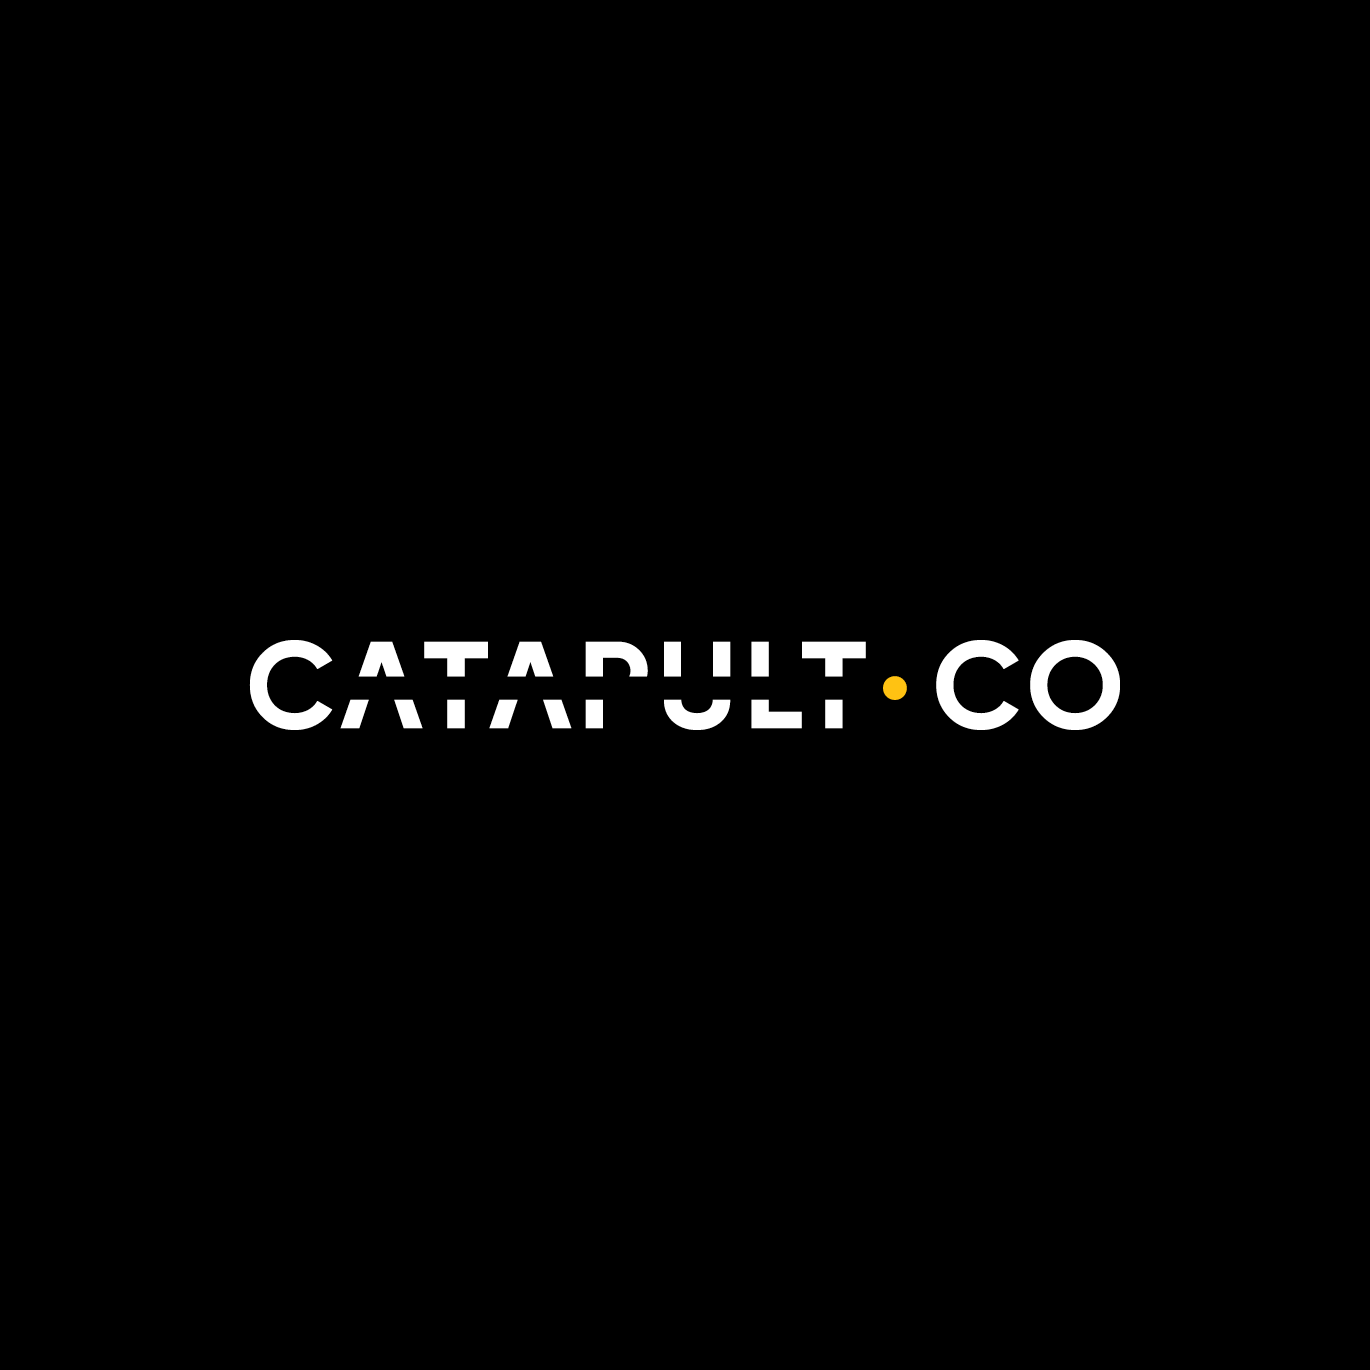 Catapult Co. logo by Squeeze Creative